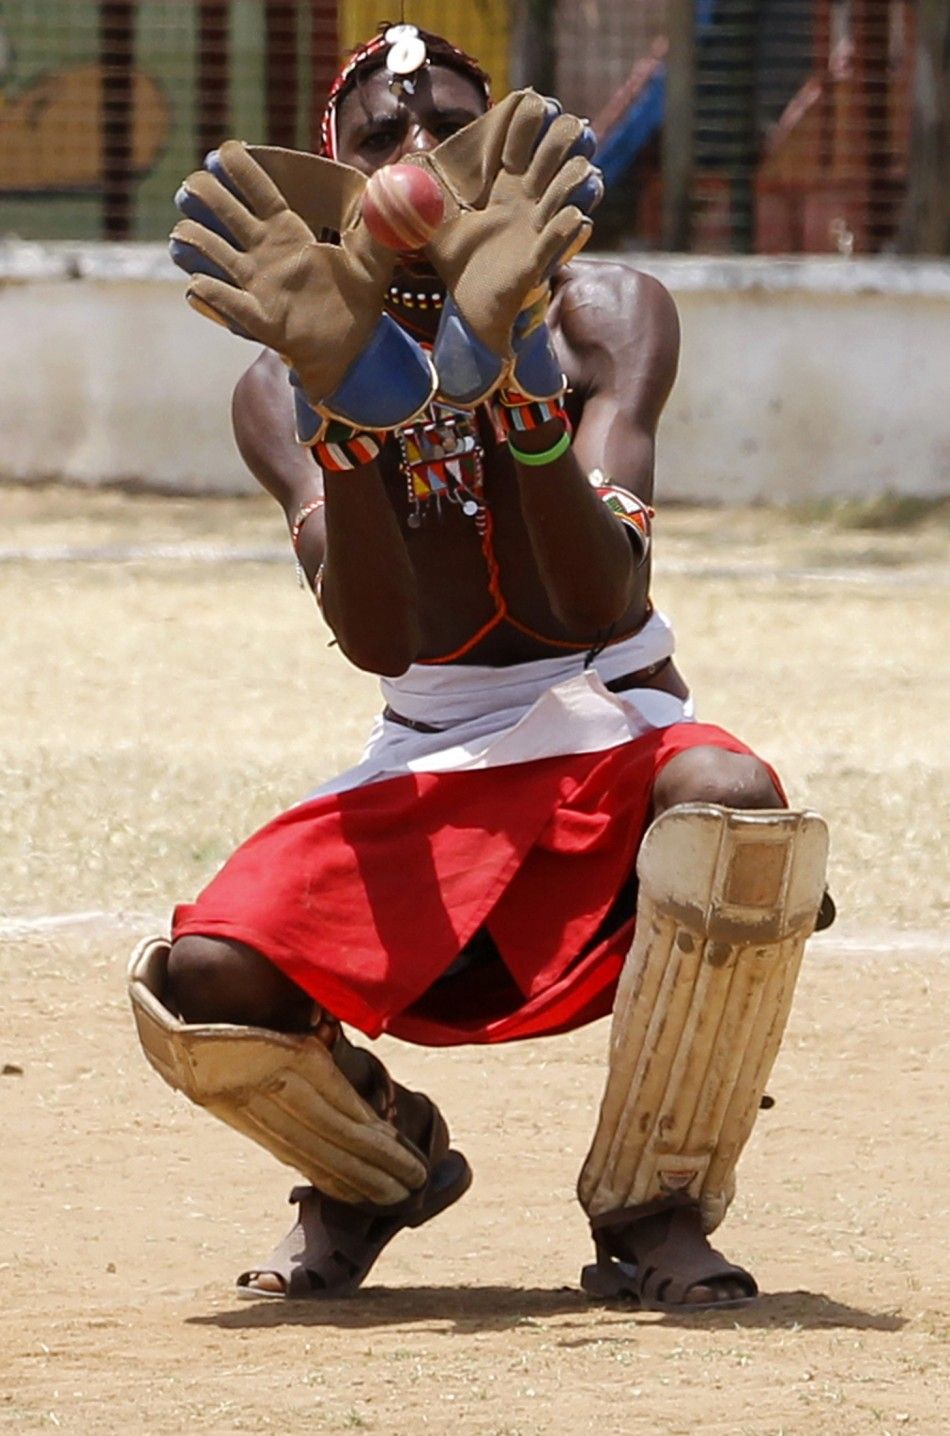 A member of the Maasai Cricket Warriors team catches the ball during their friendly match in Mombasa